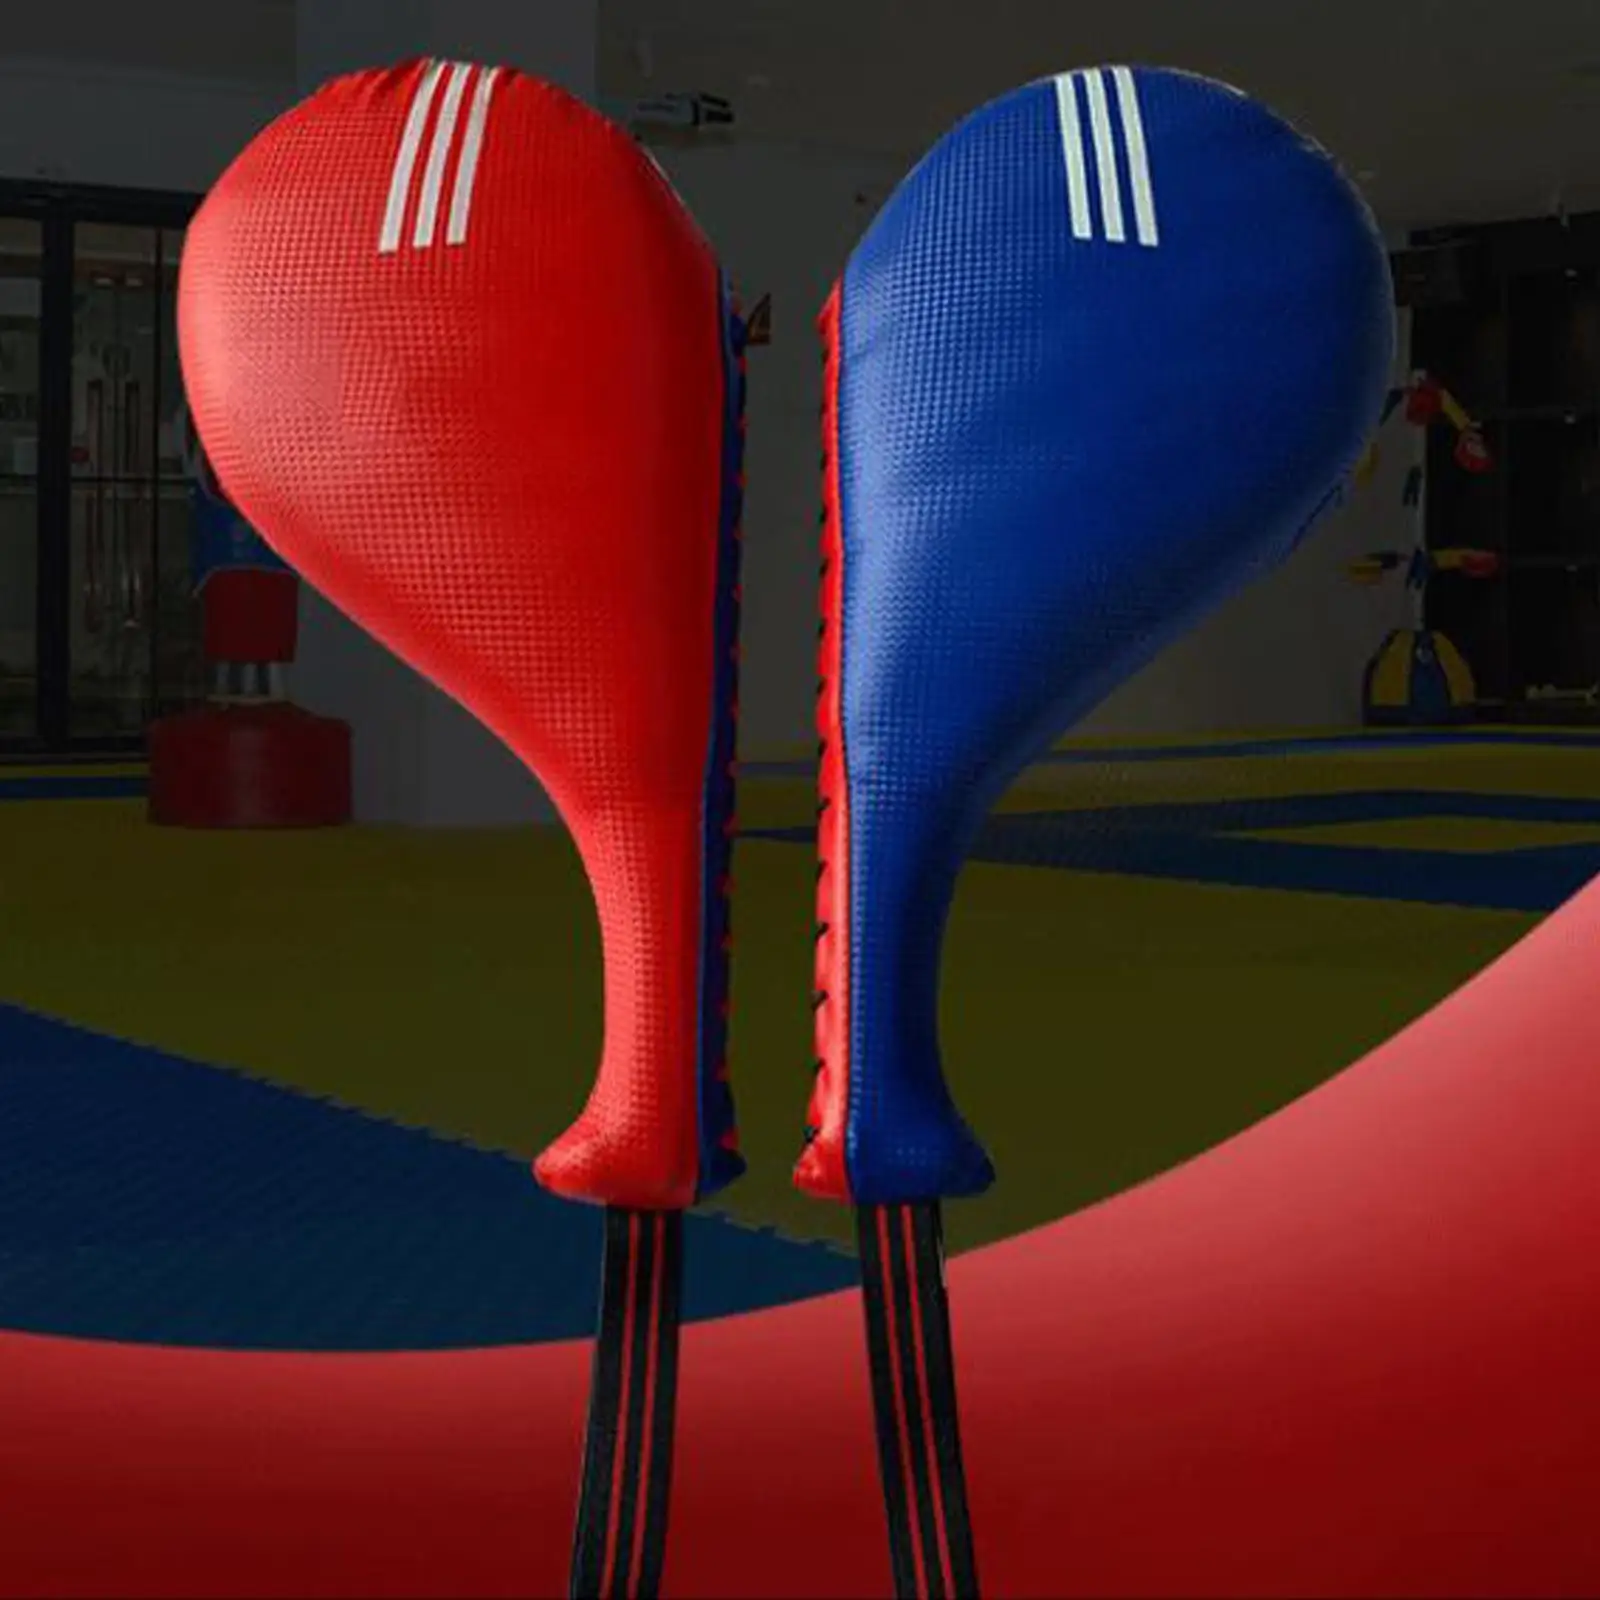 Striking Pad Double Face for Kicking Target Kickboxing Kickboxing Training Strike Pad Target Martial Arts Sporting Goods